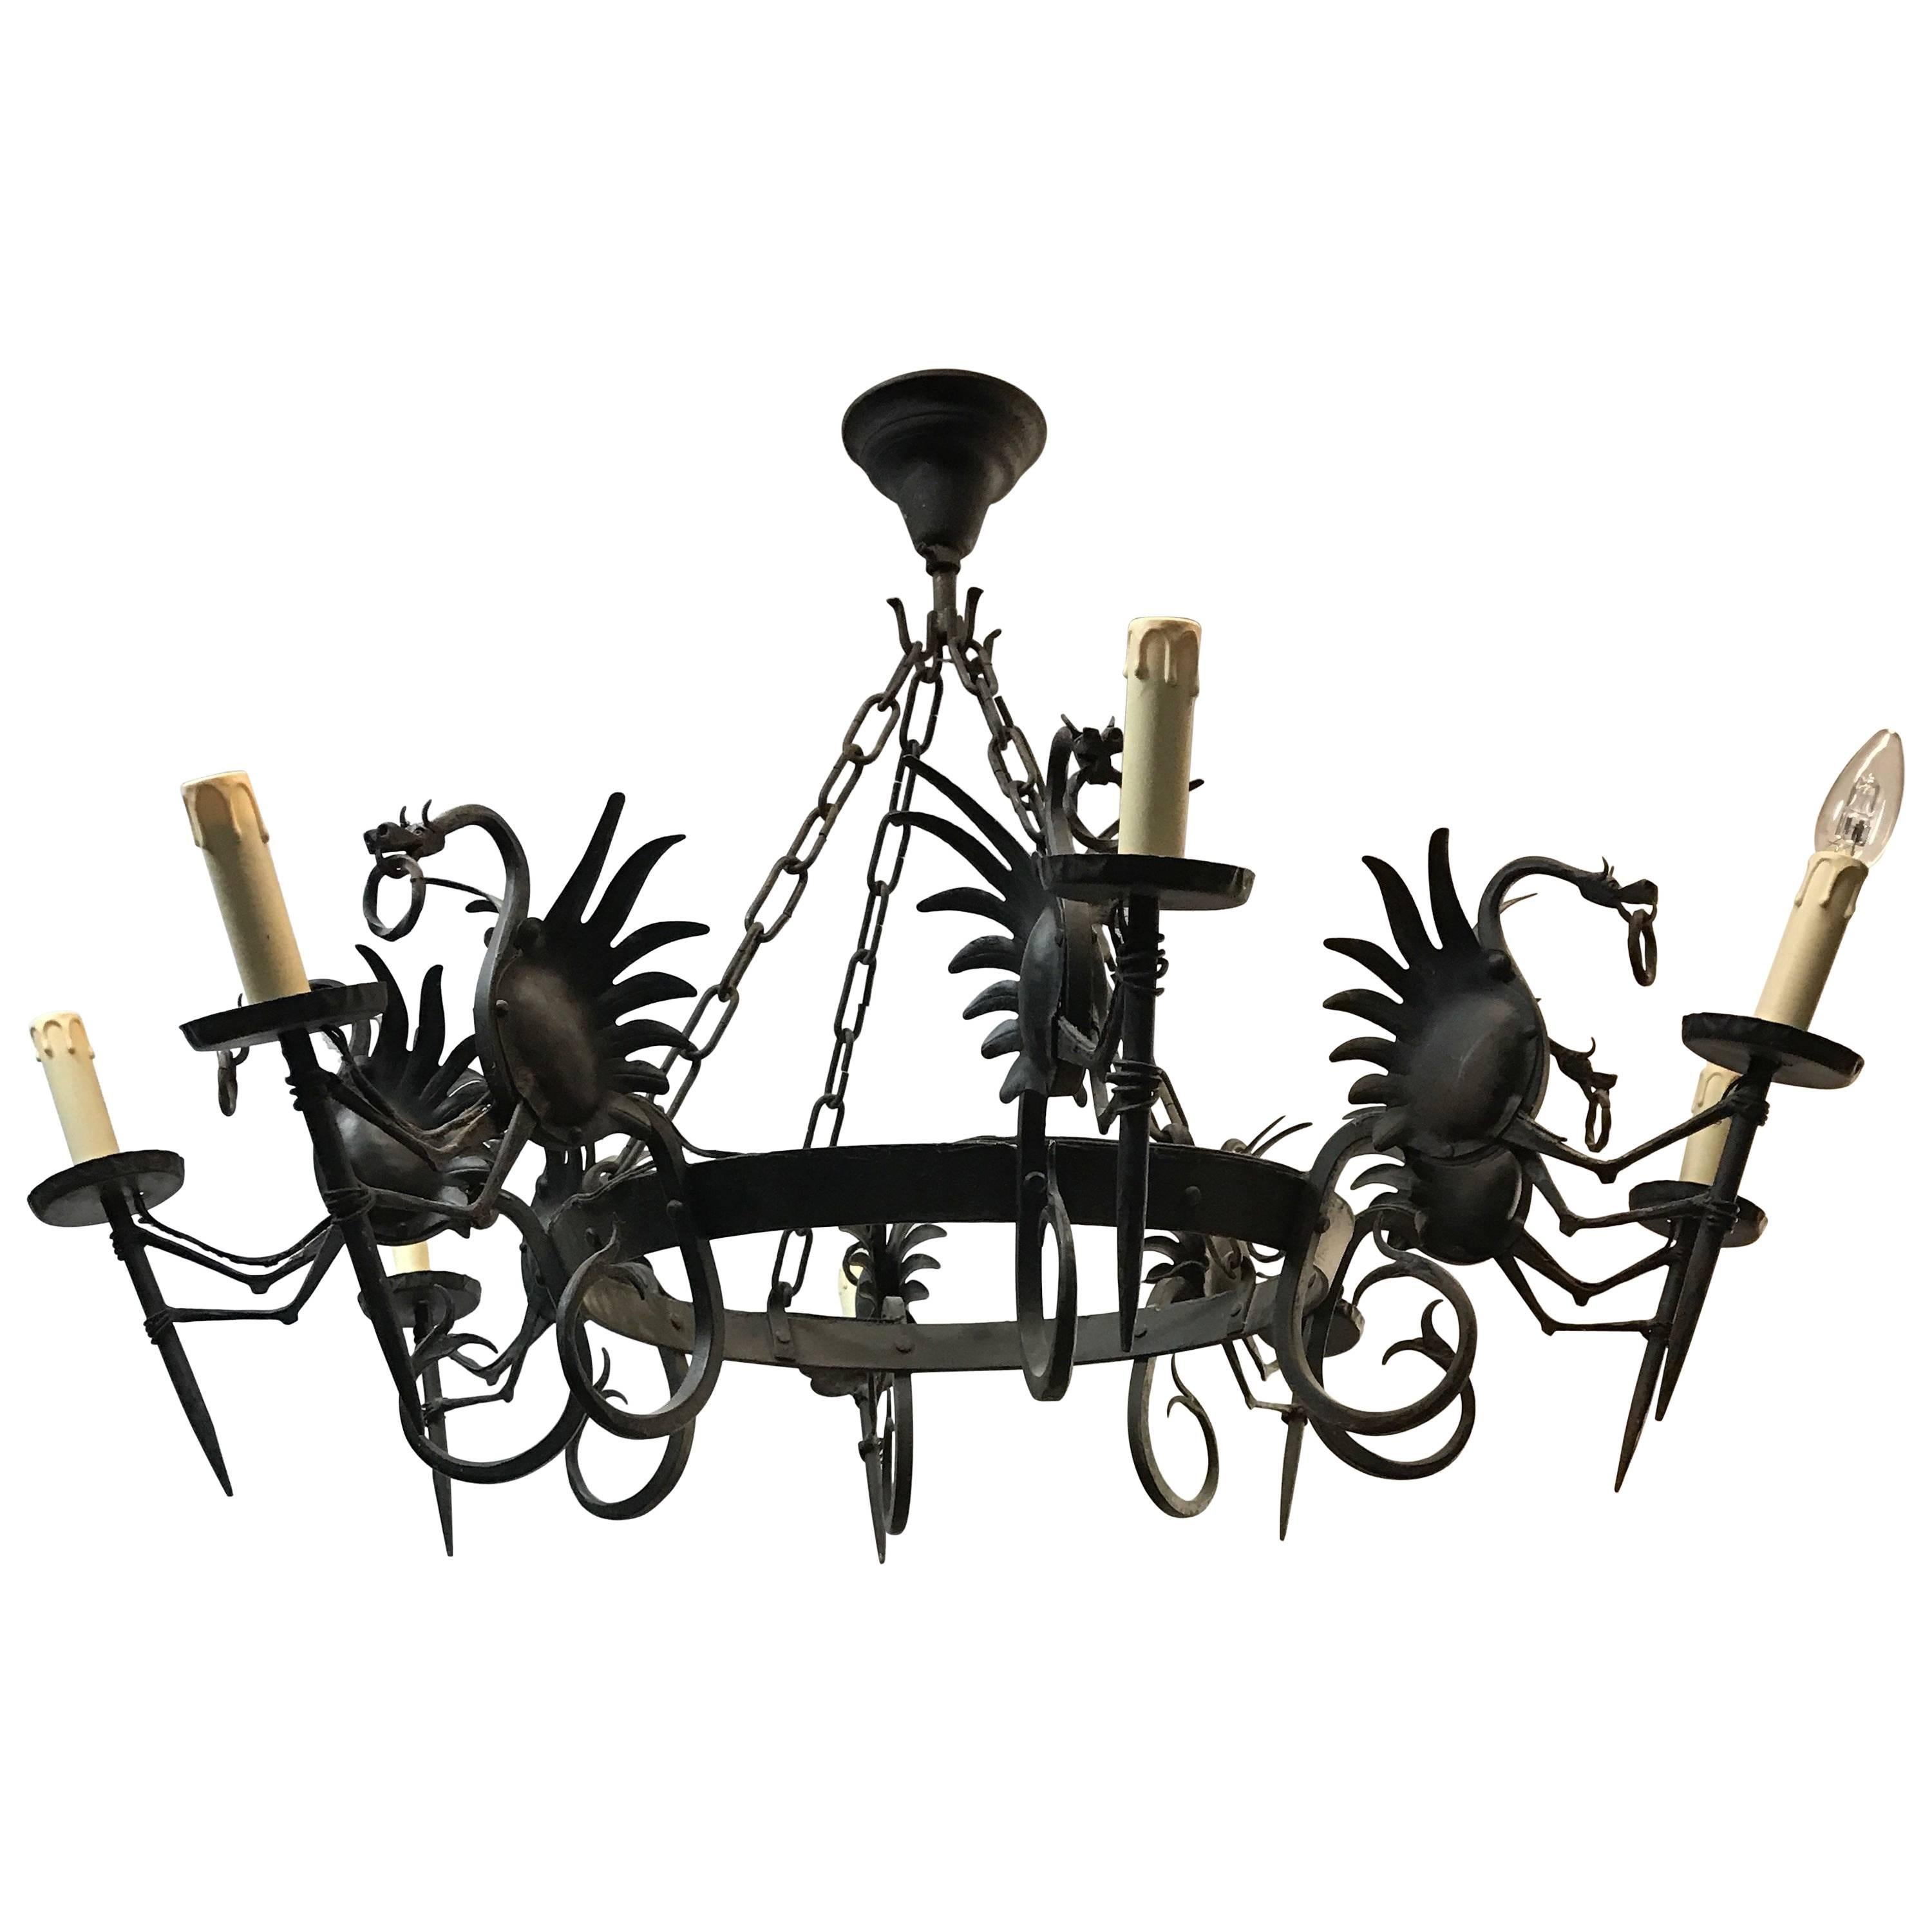 Impressive Large Forged Wrought Iron Eight-Light Chandelier w Dragon Sculptures